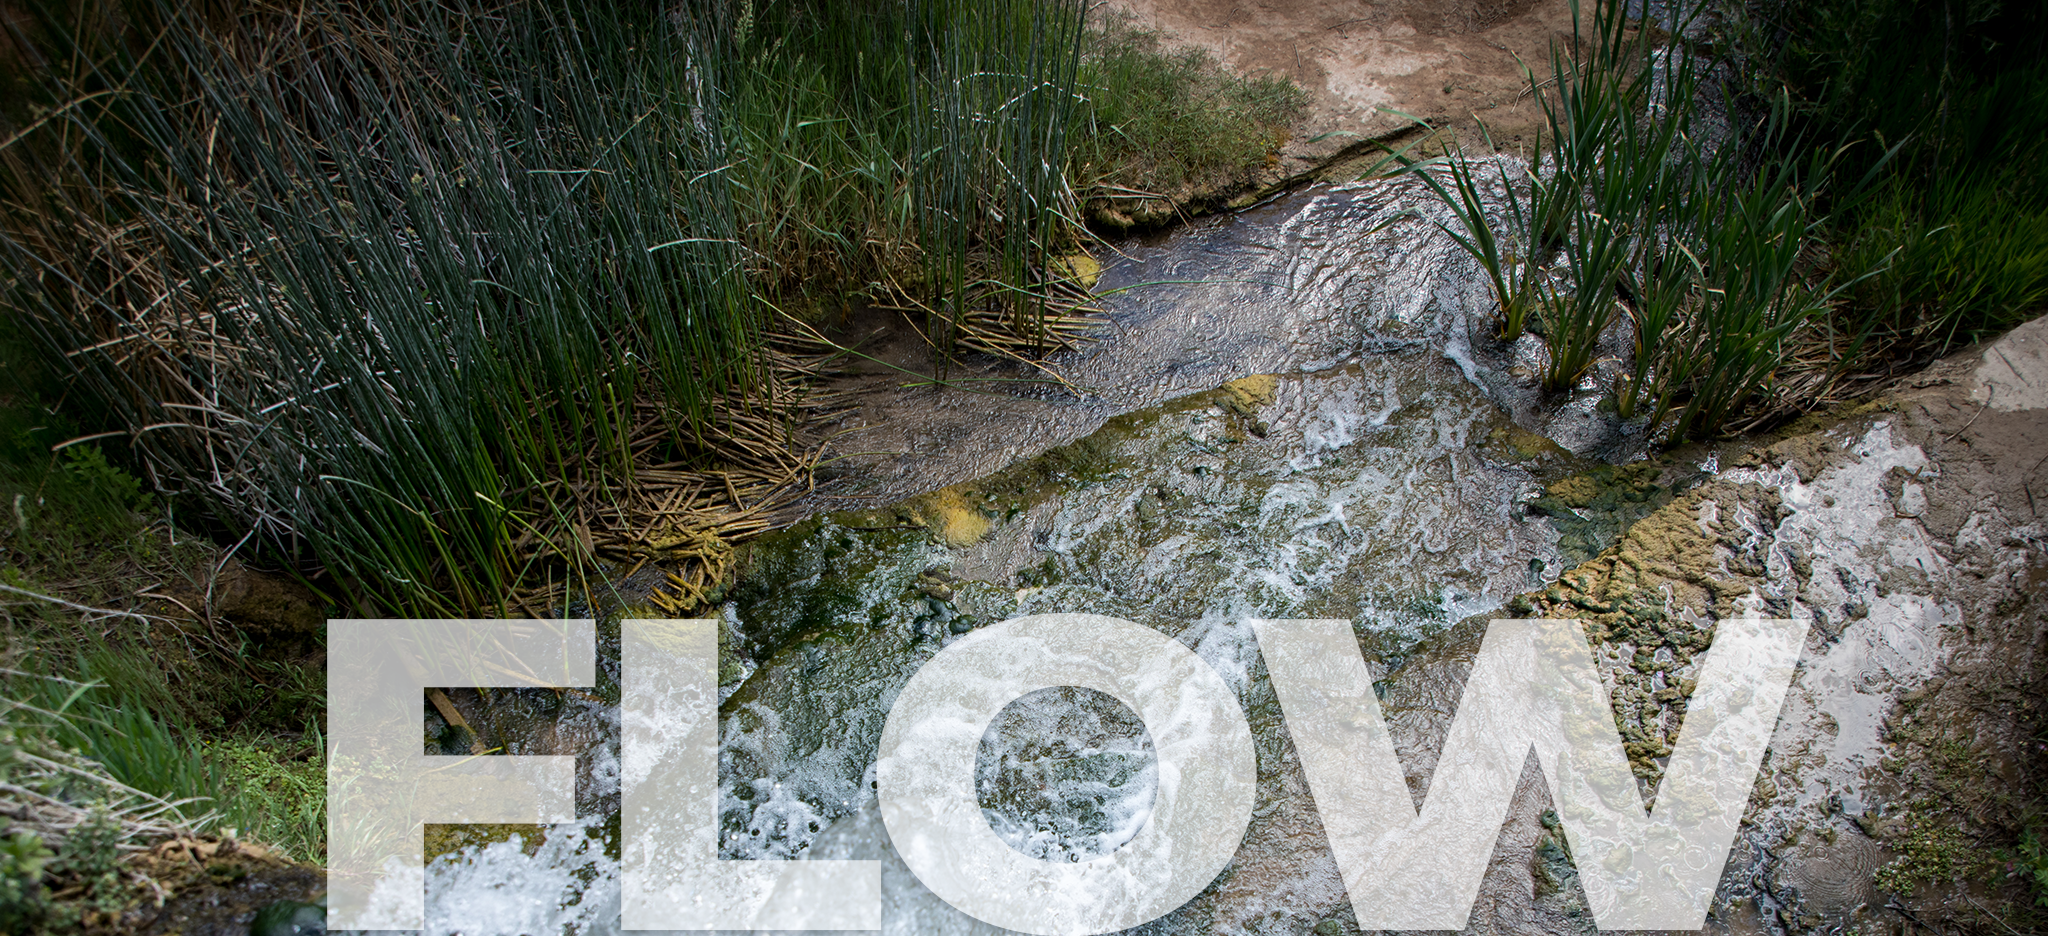 What Does it Mean to Flow?